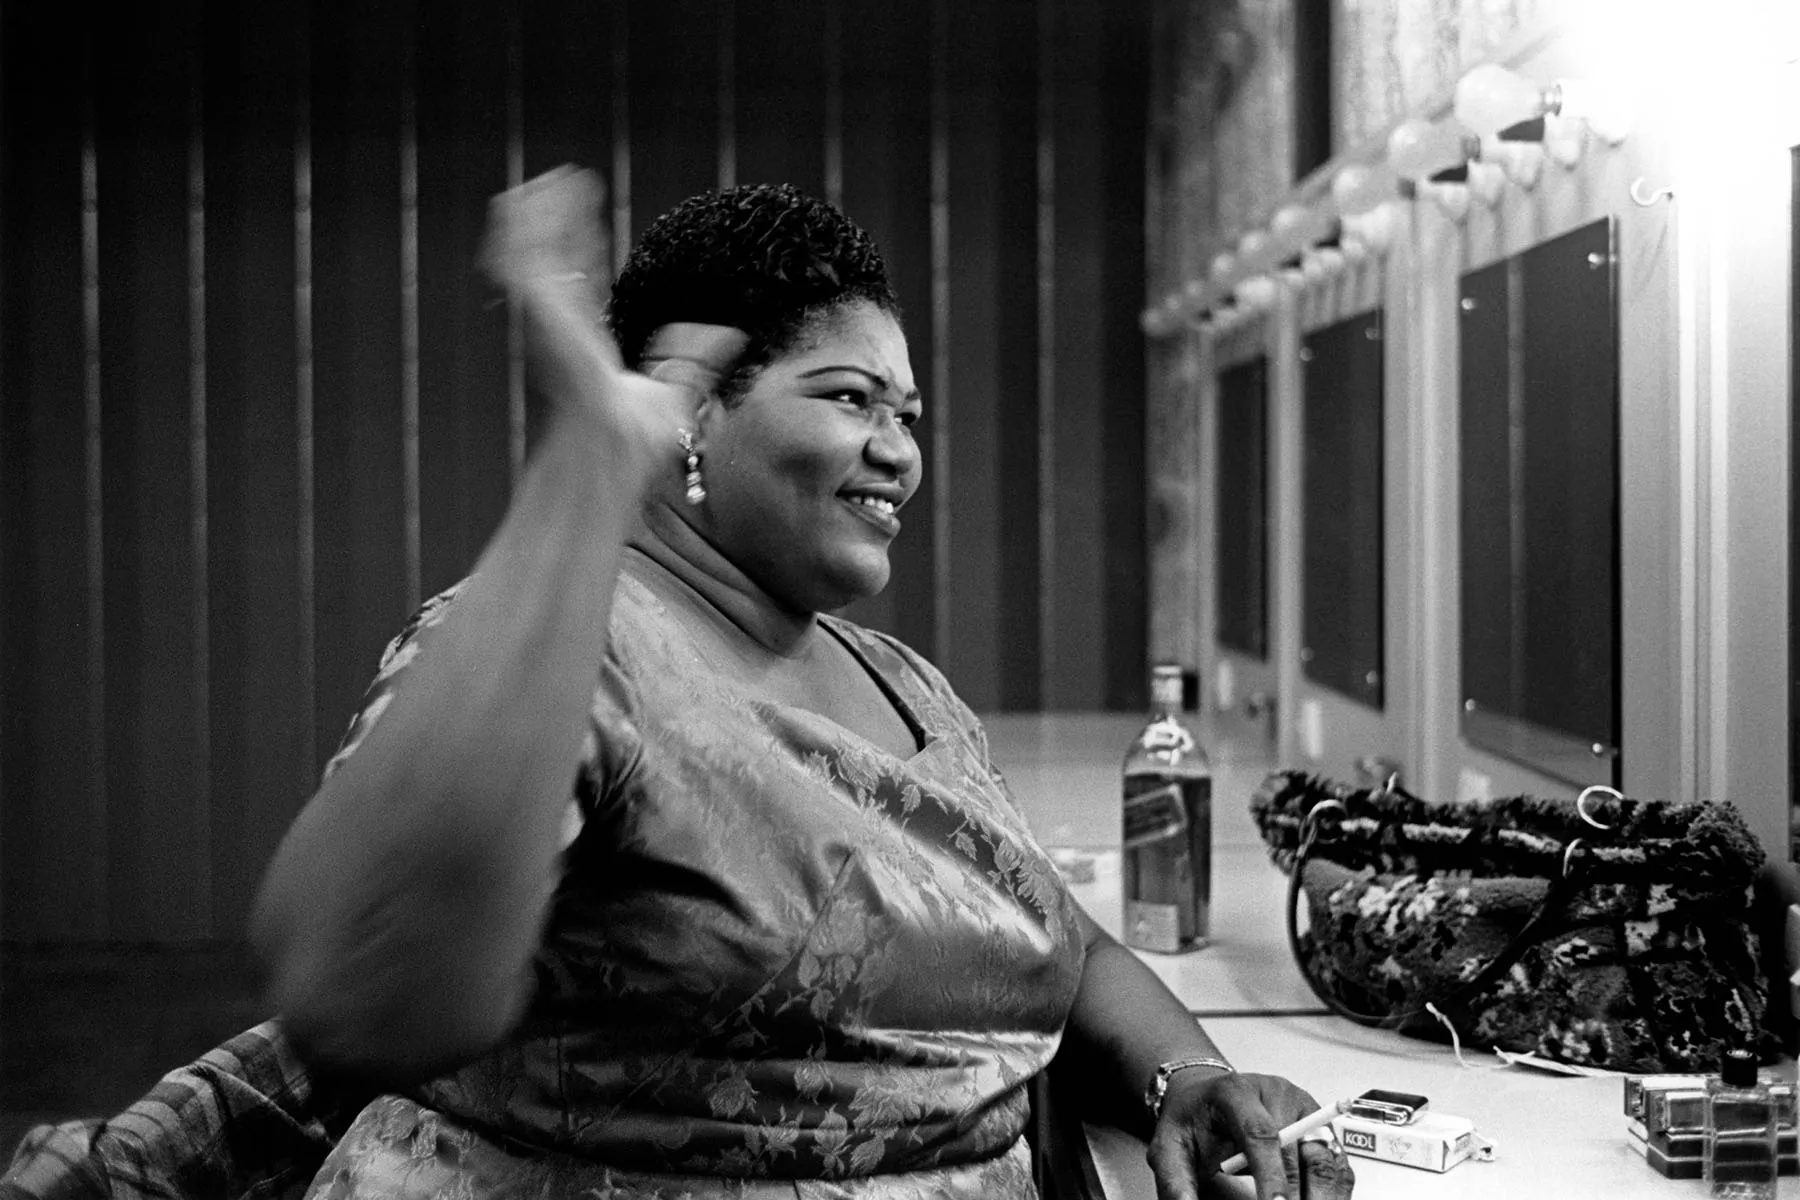 Willie Mae “Big Mama” Thornton smokes in her dressing room.